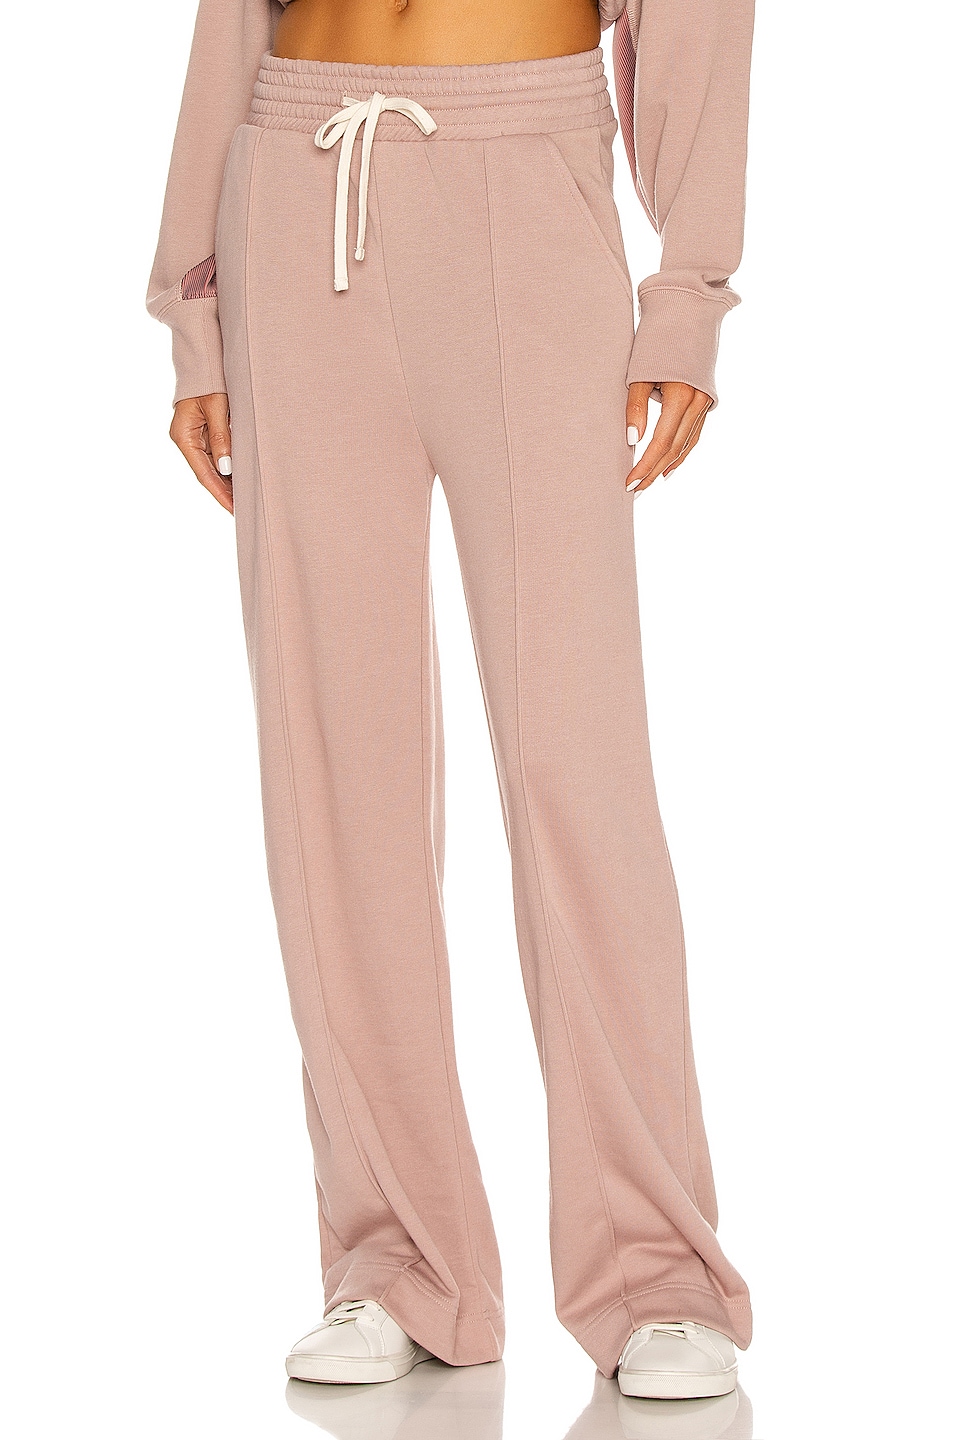 Image 1 of Nylora Beo Pants in Terracotta Blush